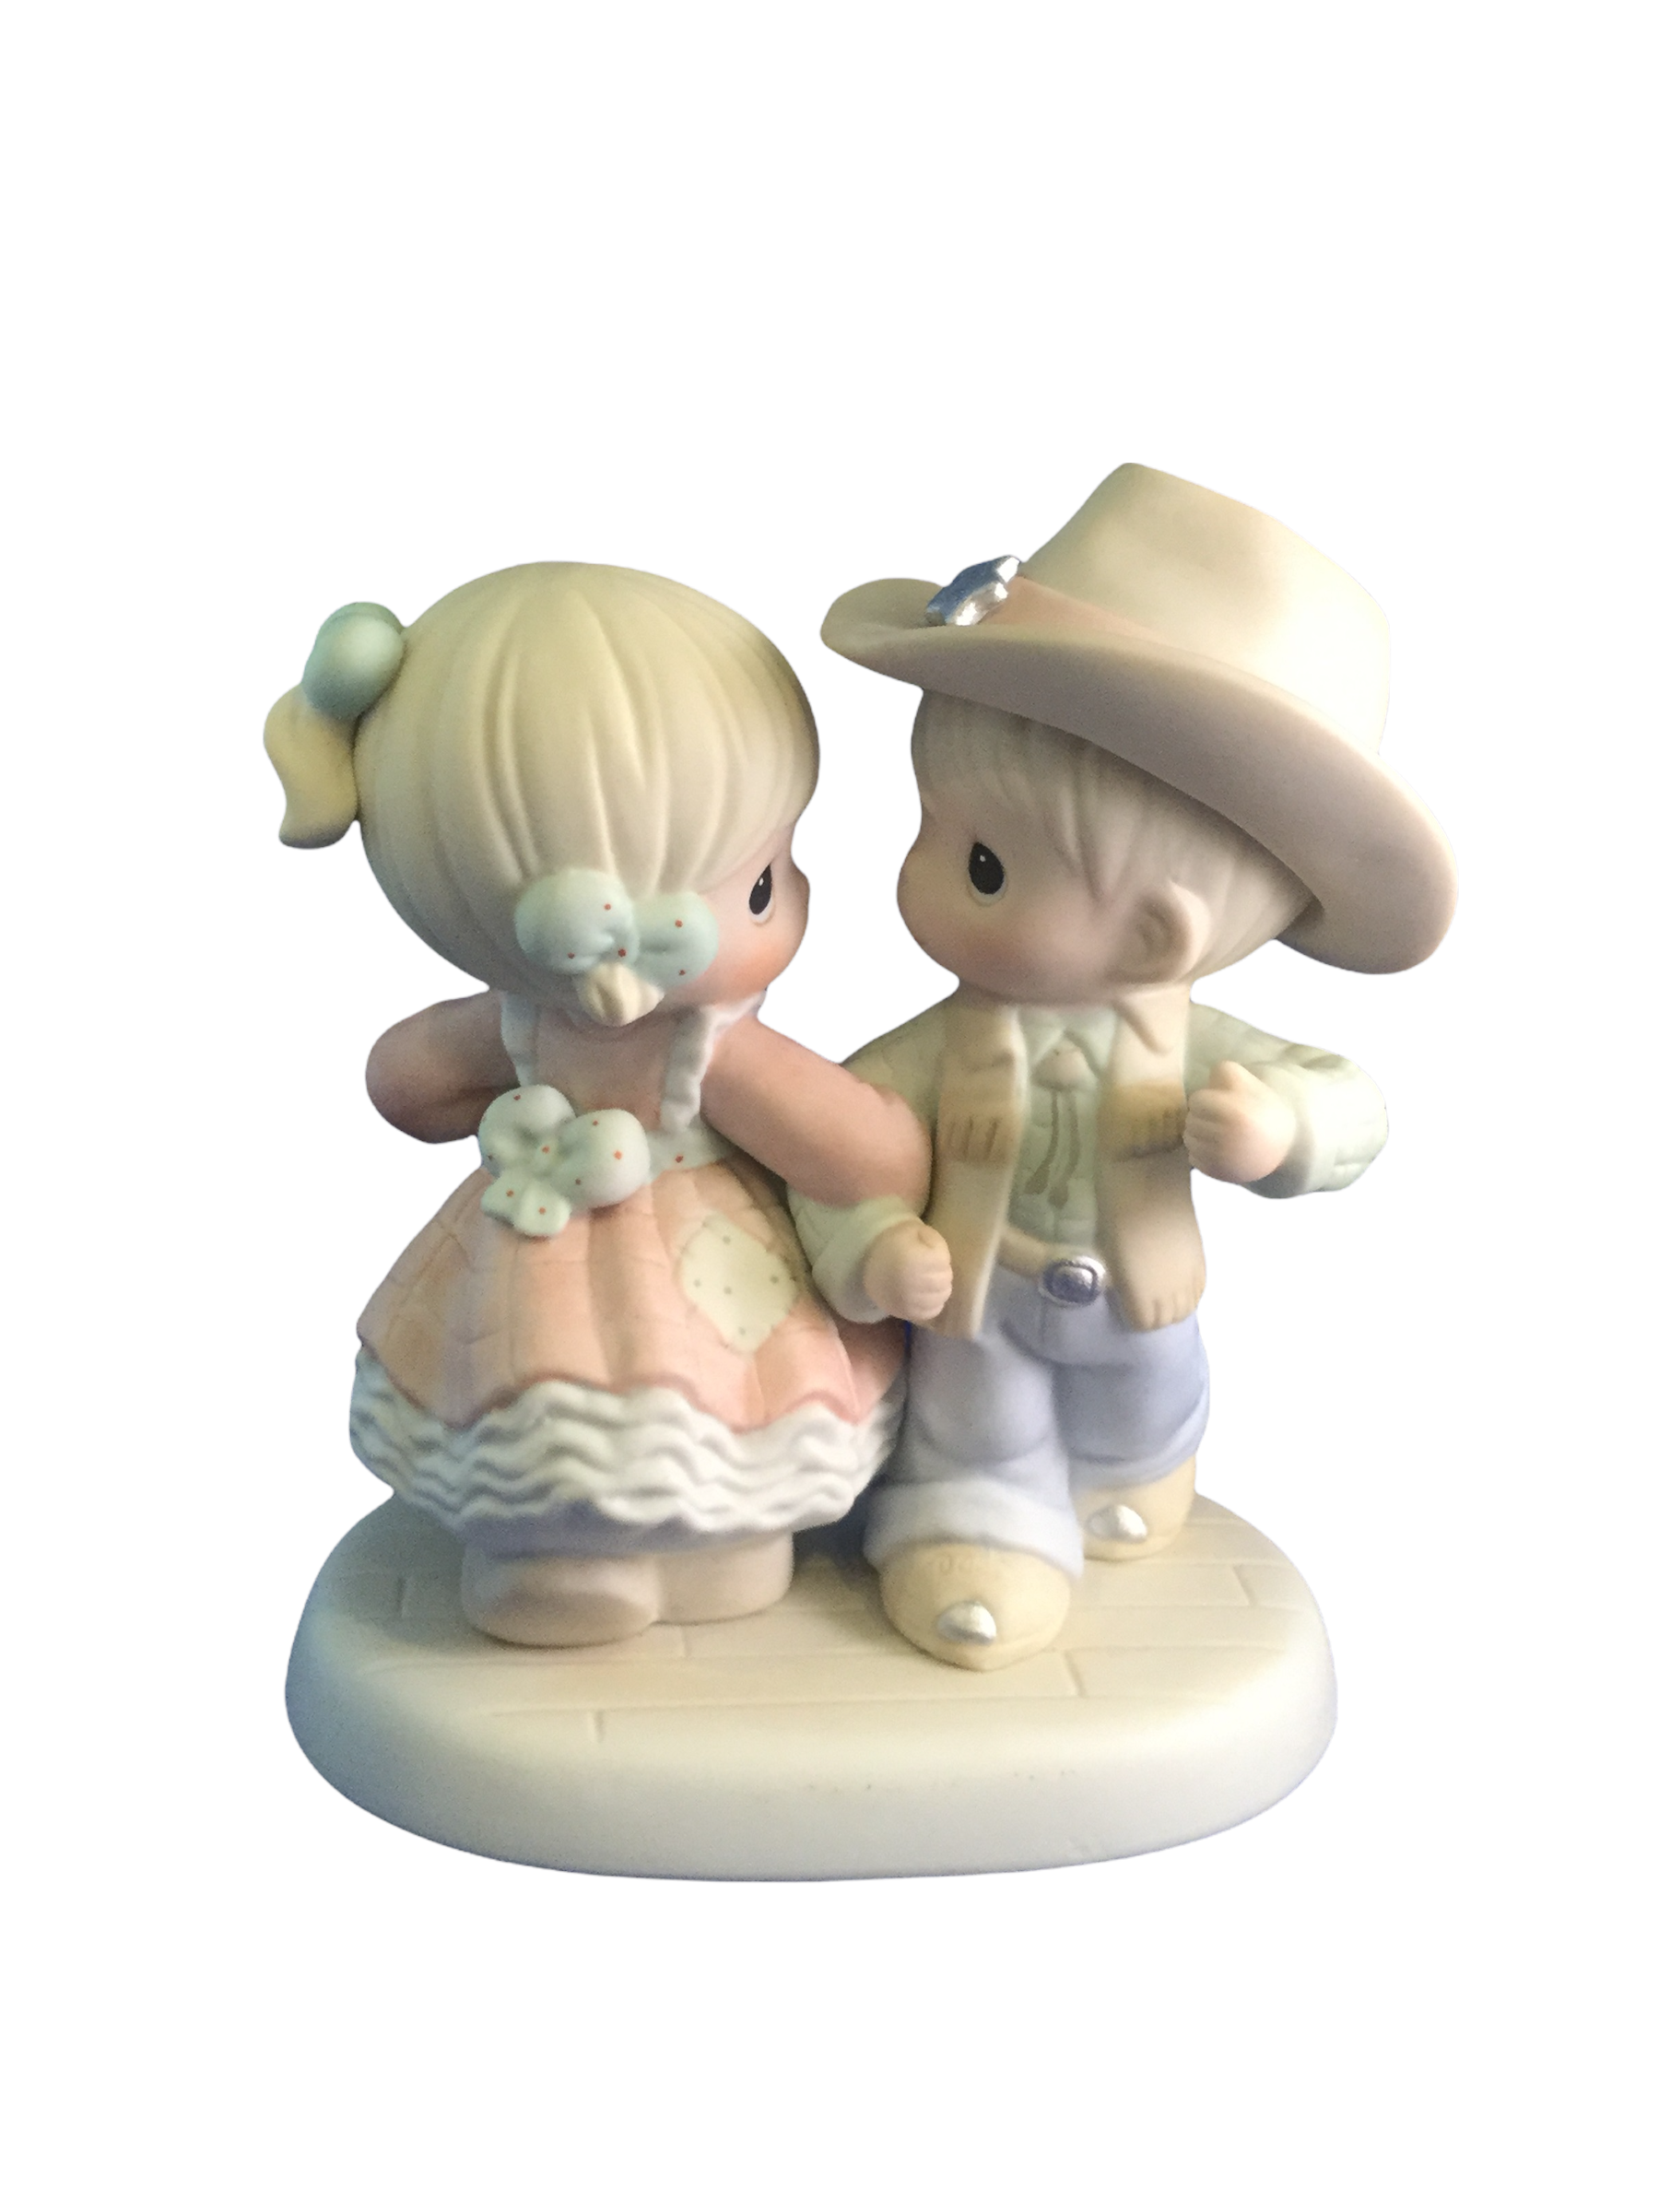 Praise The Lord And Dosie-Do - Precious Moment Figurine